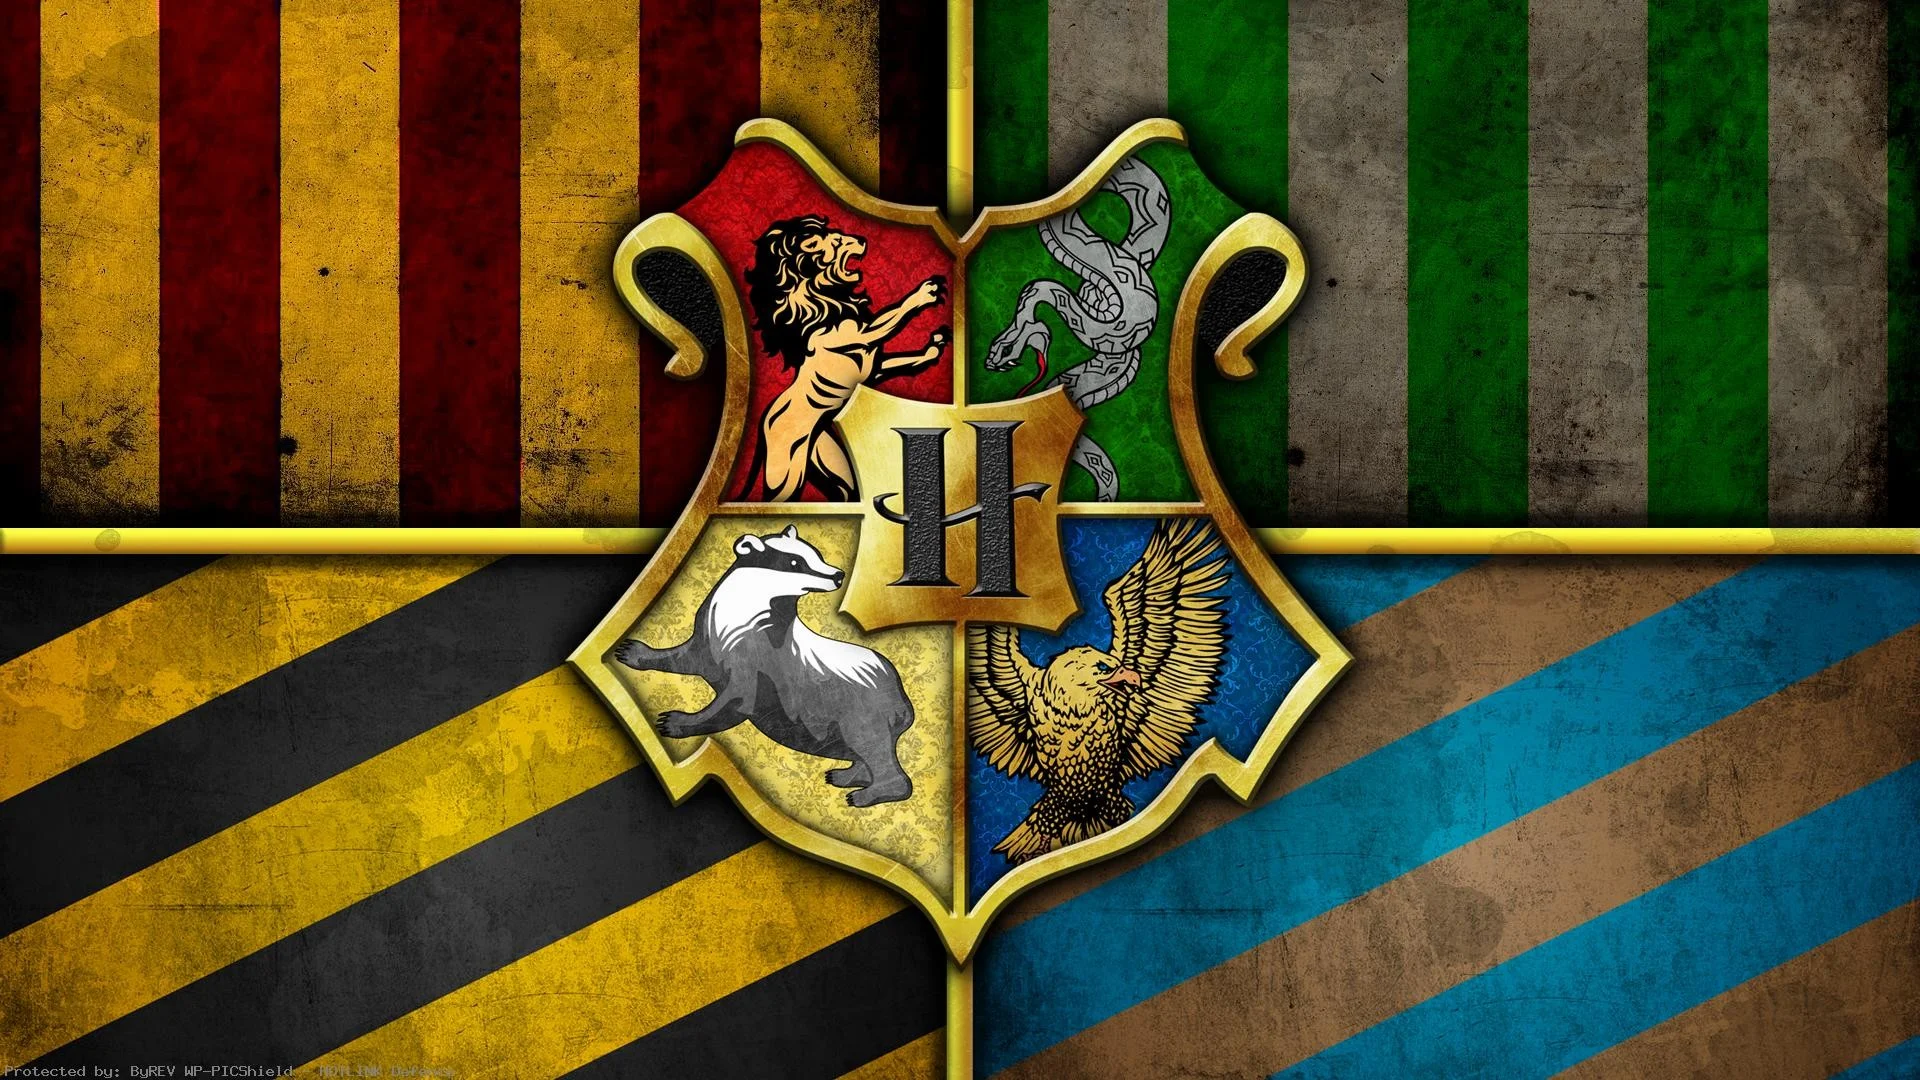 The-Houses-of-Hogwarts-1920×1080-Need-iPhone-S-